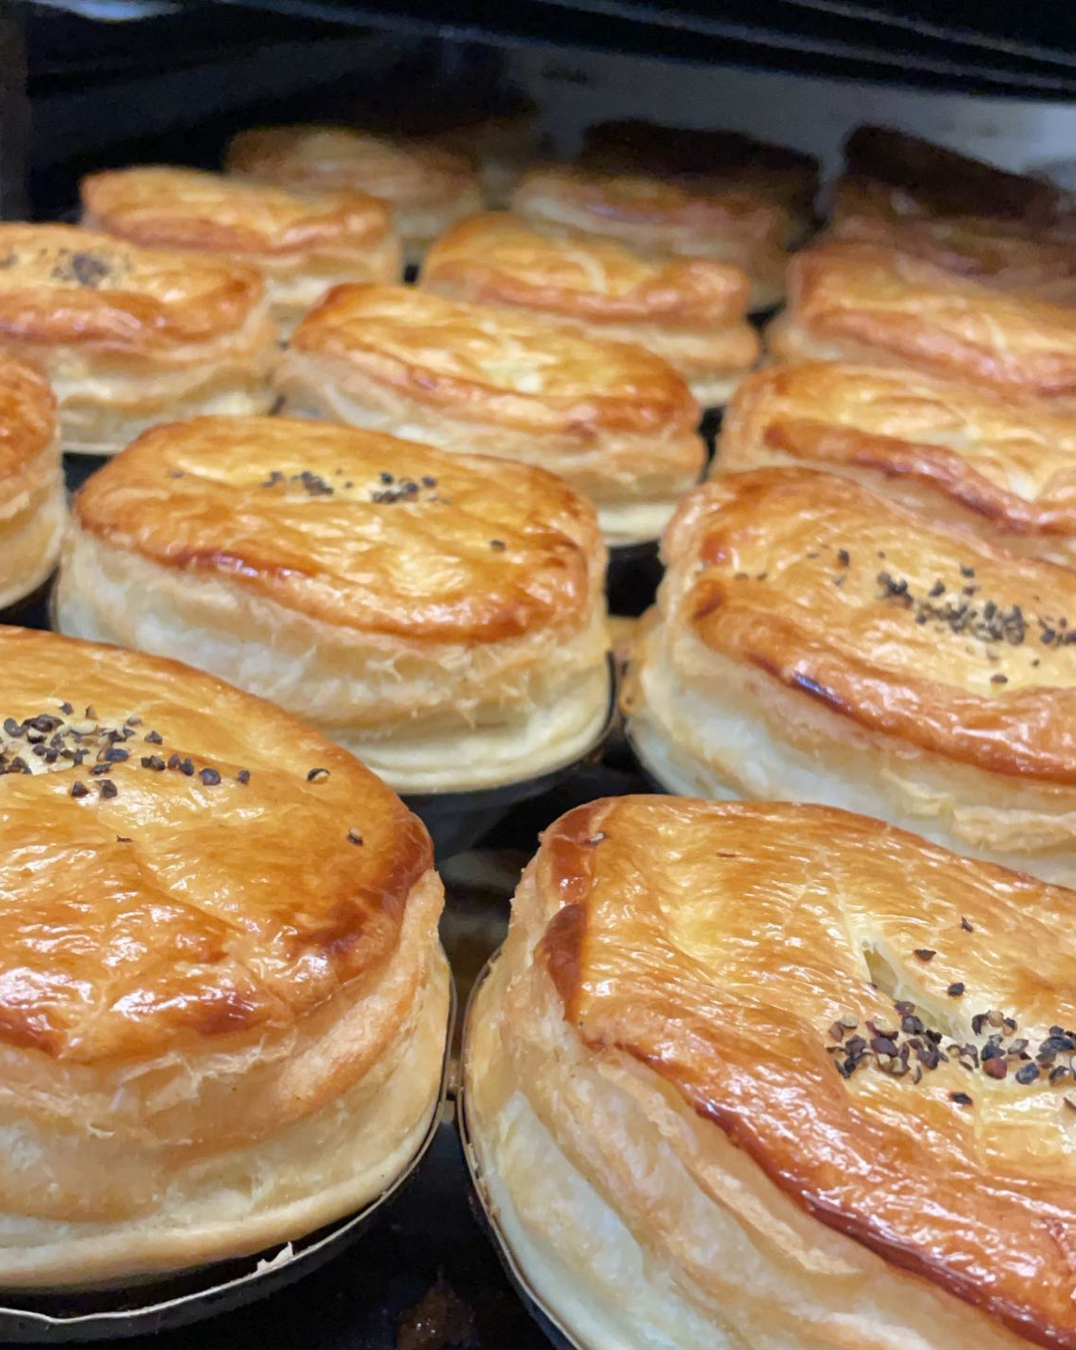 A tray of freshly baked and very puffed-up looking pies. 